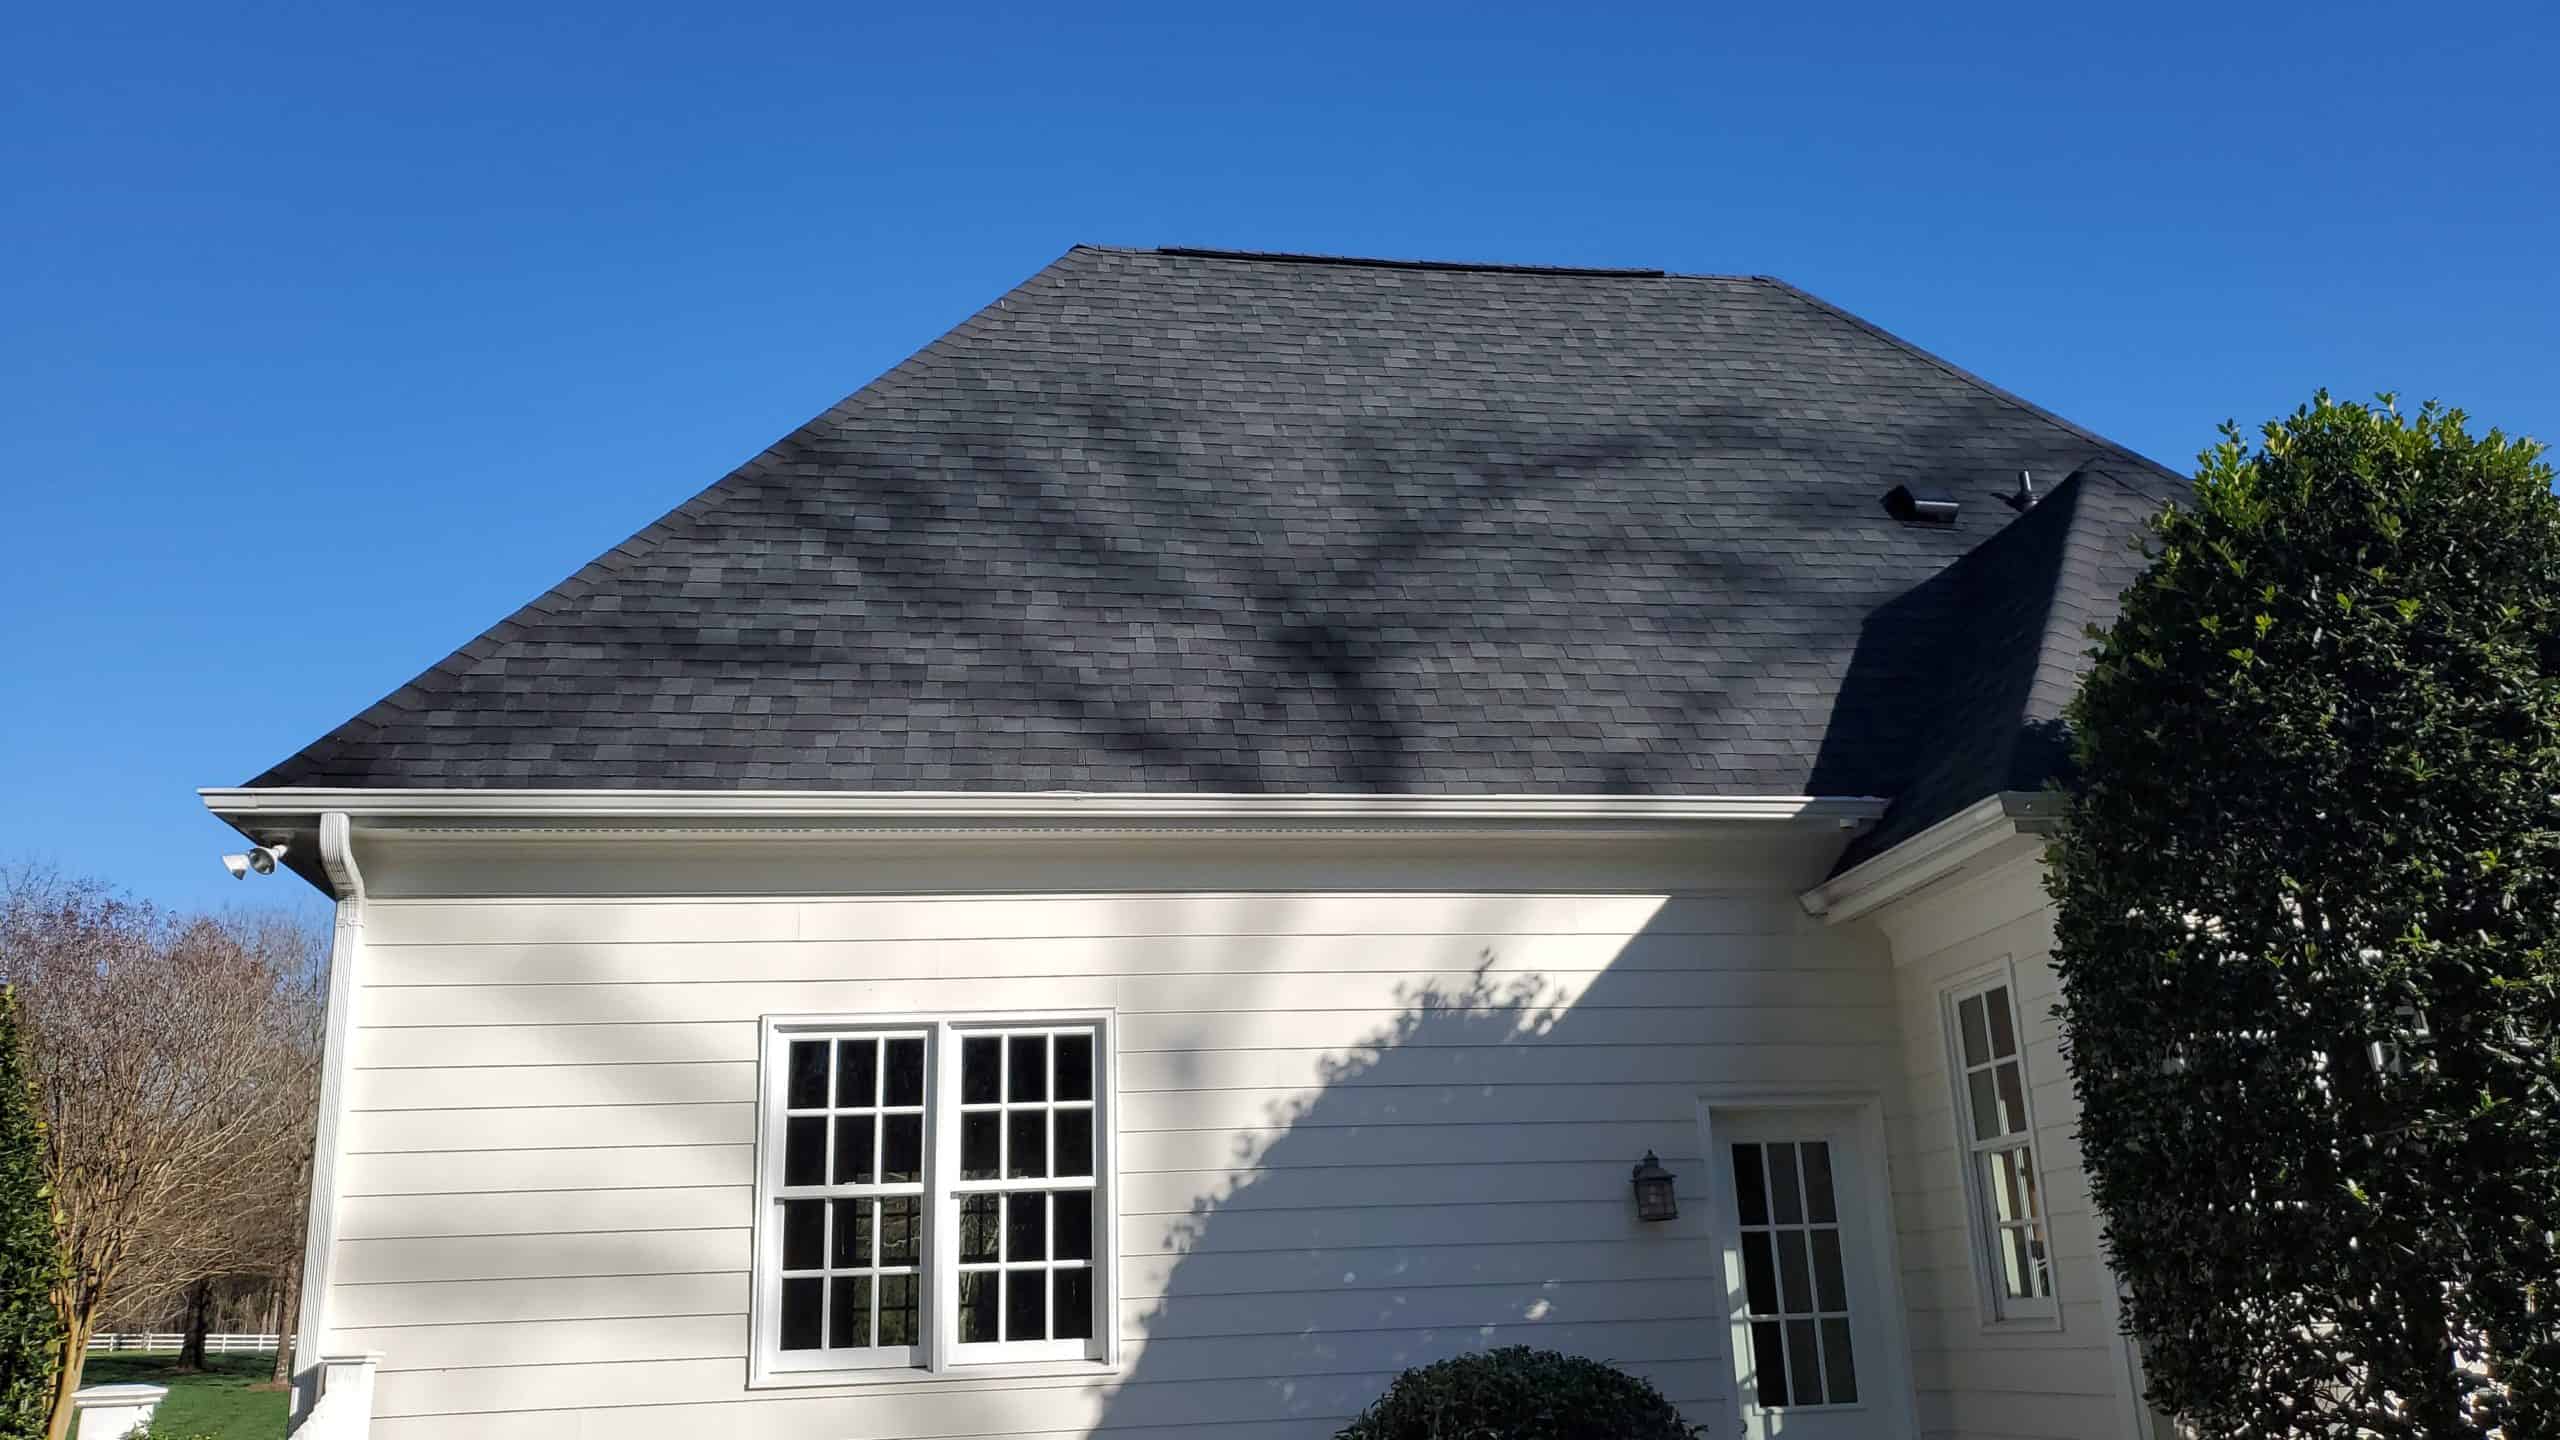 http://side%20view%20of%20white%20residential%20home%20with%20windows%20and%20dark%20asphalt%20shingles